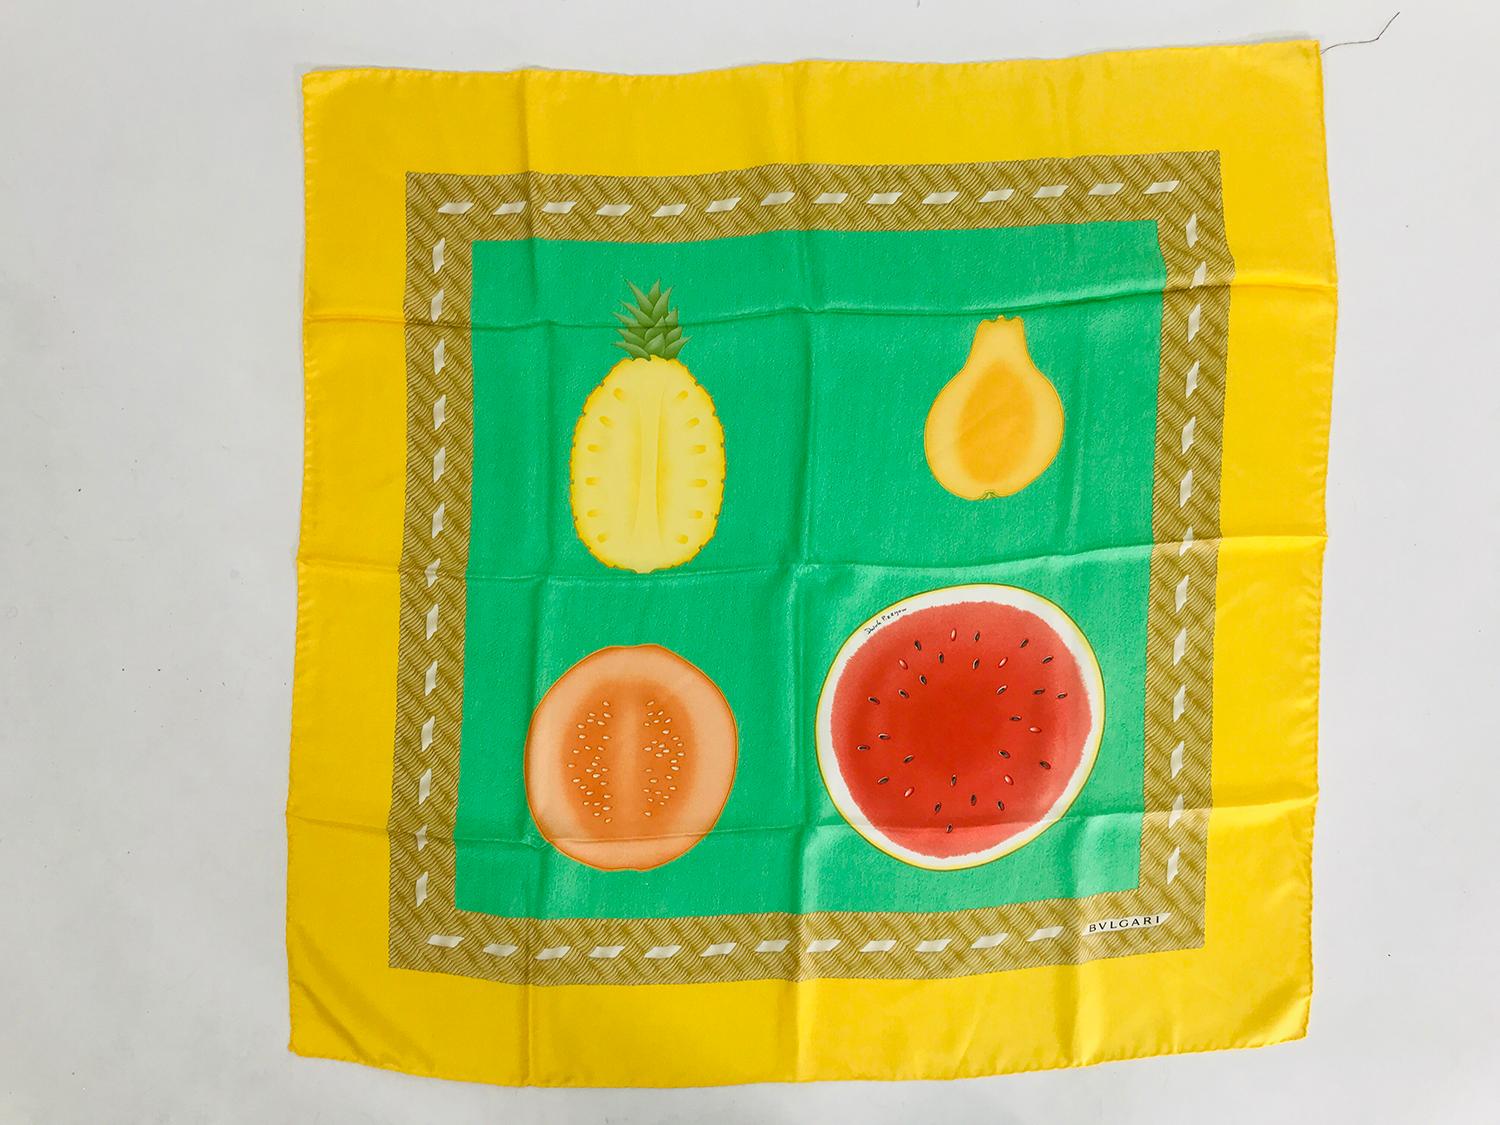 Bulgari colourful fruits silk scarf designed by Davide Pizzigoni. Bright yellow border with 4 large fruits set against a green ground,each in their own square. Surrounded with a tan with a braided border in taupes. This would be perfect to frame for